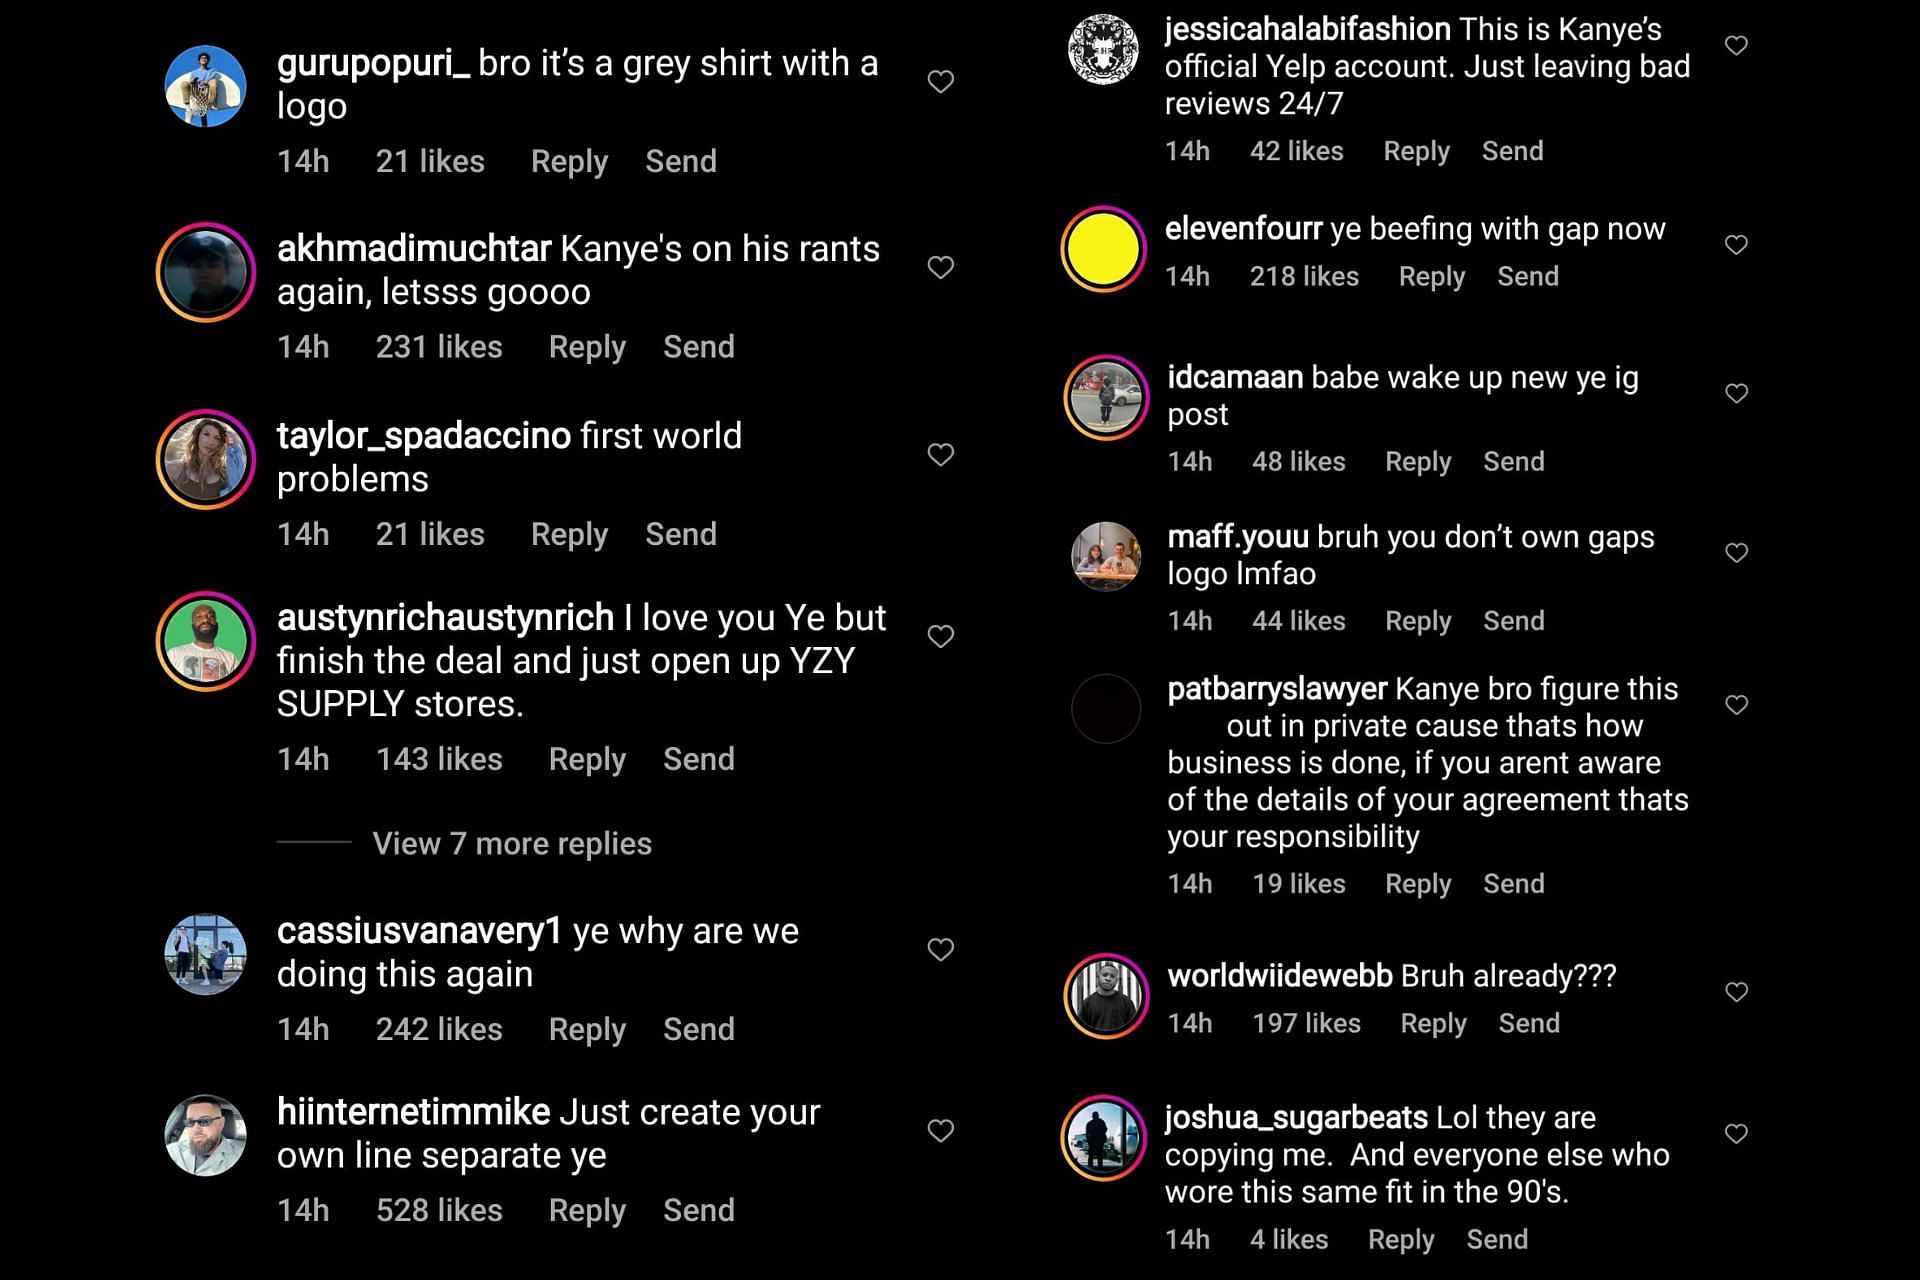 Fans reaction to Kanye West&#039;s latest quibble with Gap over a canceled photoshoot with his kids and copying of designs - Not in favor of Kanye (Image via Sportskeeda)